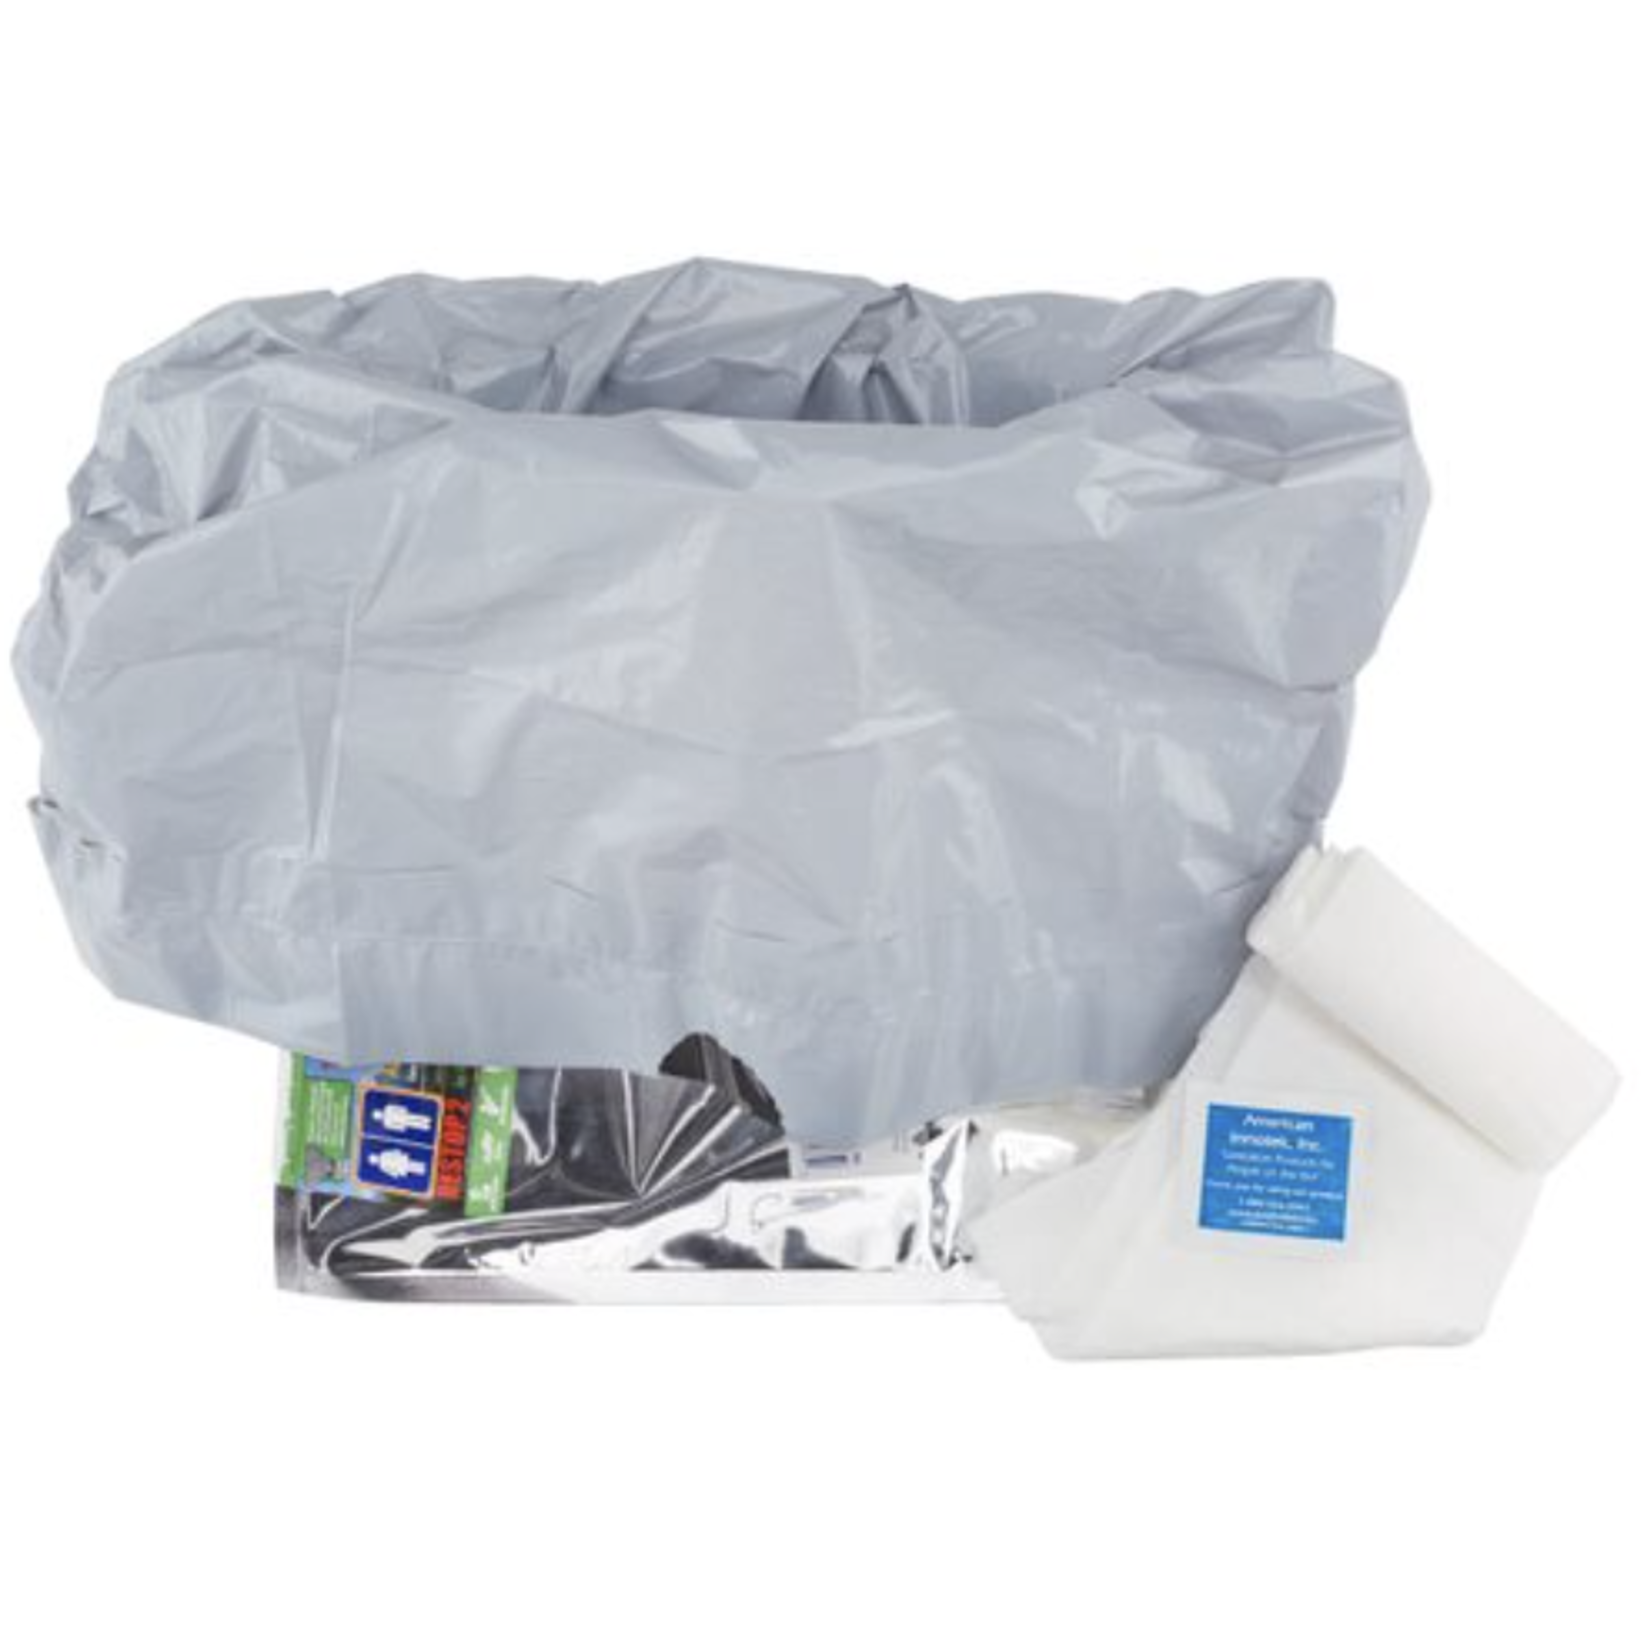 NRS Restop 2 Disposable Bags